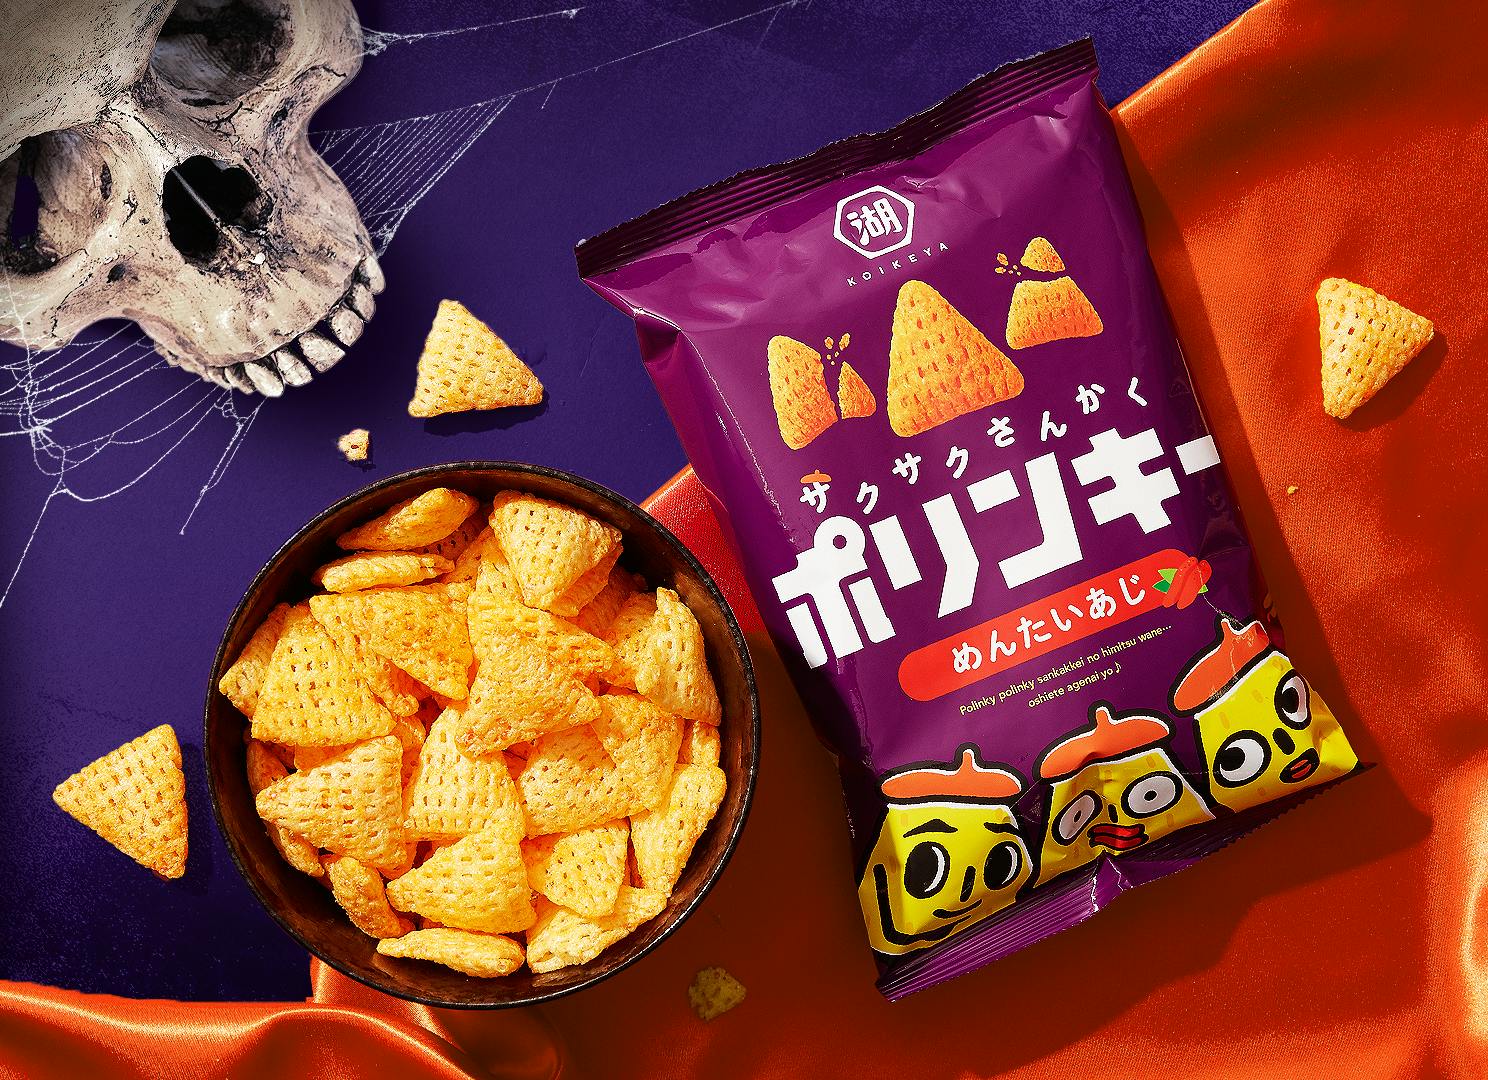 The purple bag of Polinky Mentaiko Corn Snacks sits against a backdrop of red and purple fabric, with a Halloween skull motif nearby.